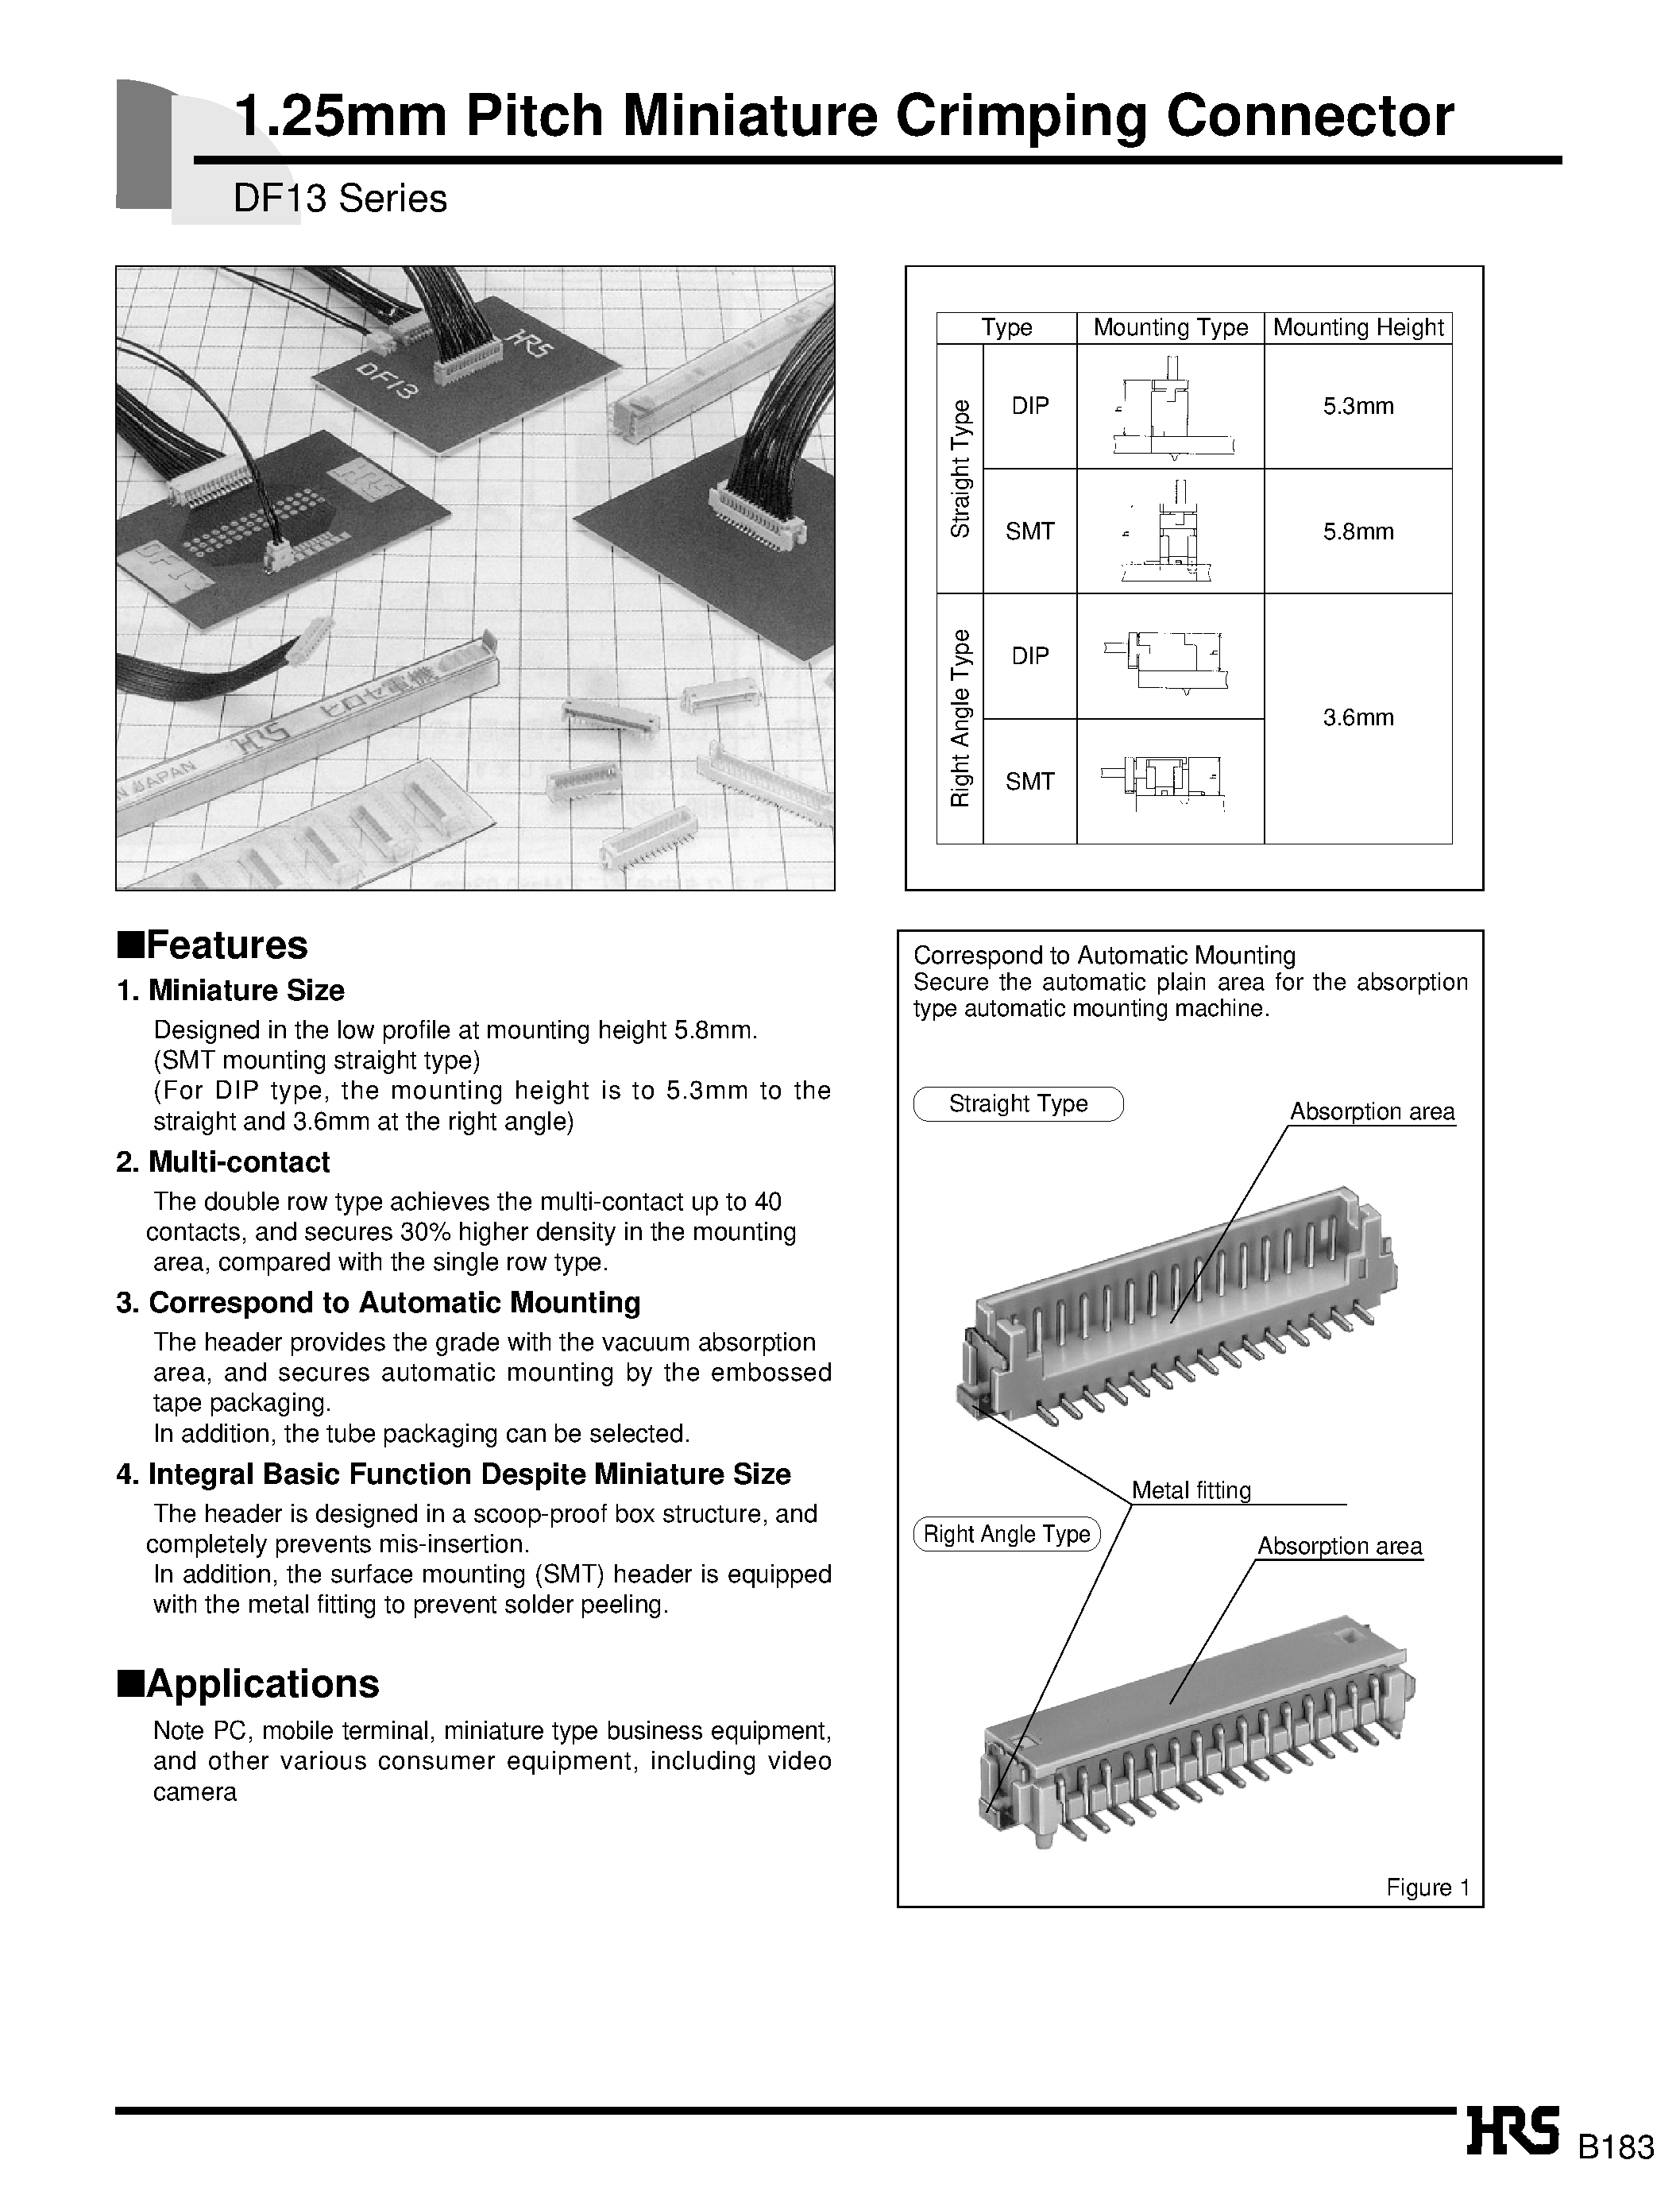 Datasheet DF13-11S-1.25V - 1.25mm Pitch Miniature Crimping Connector page 1